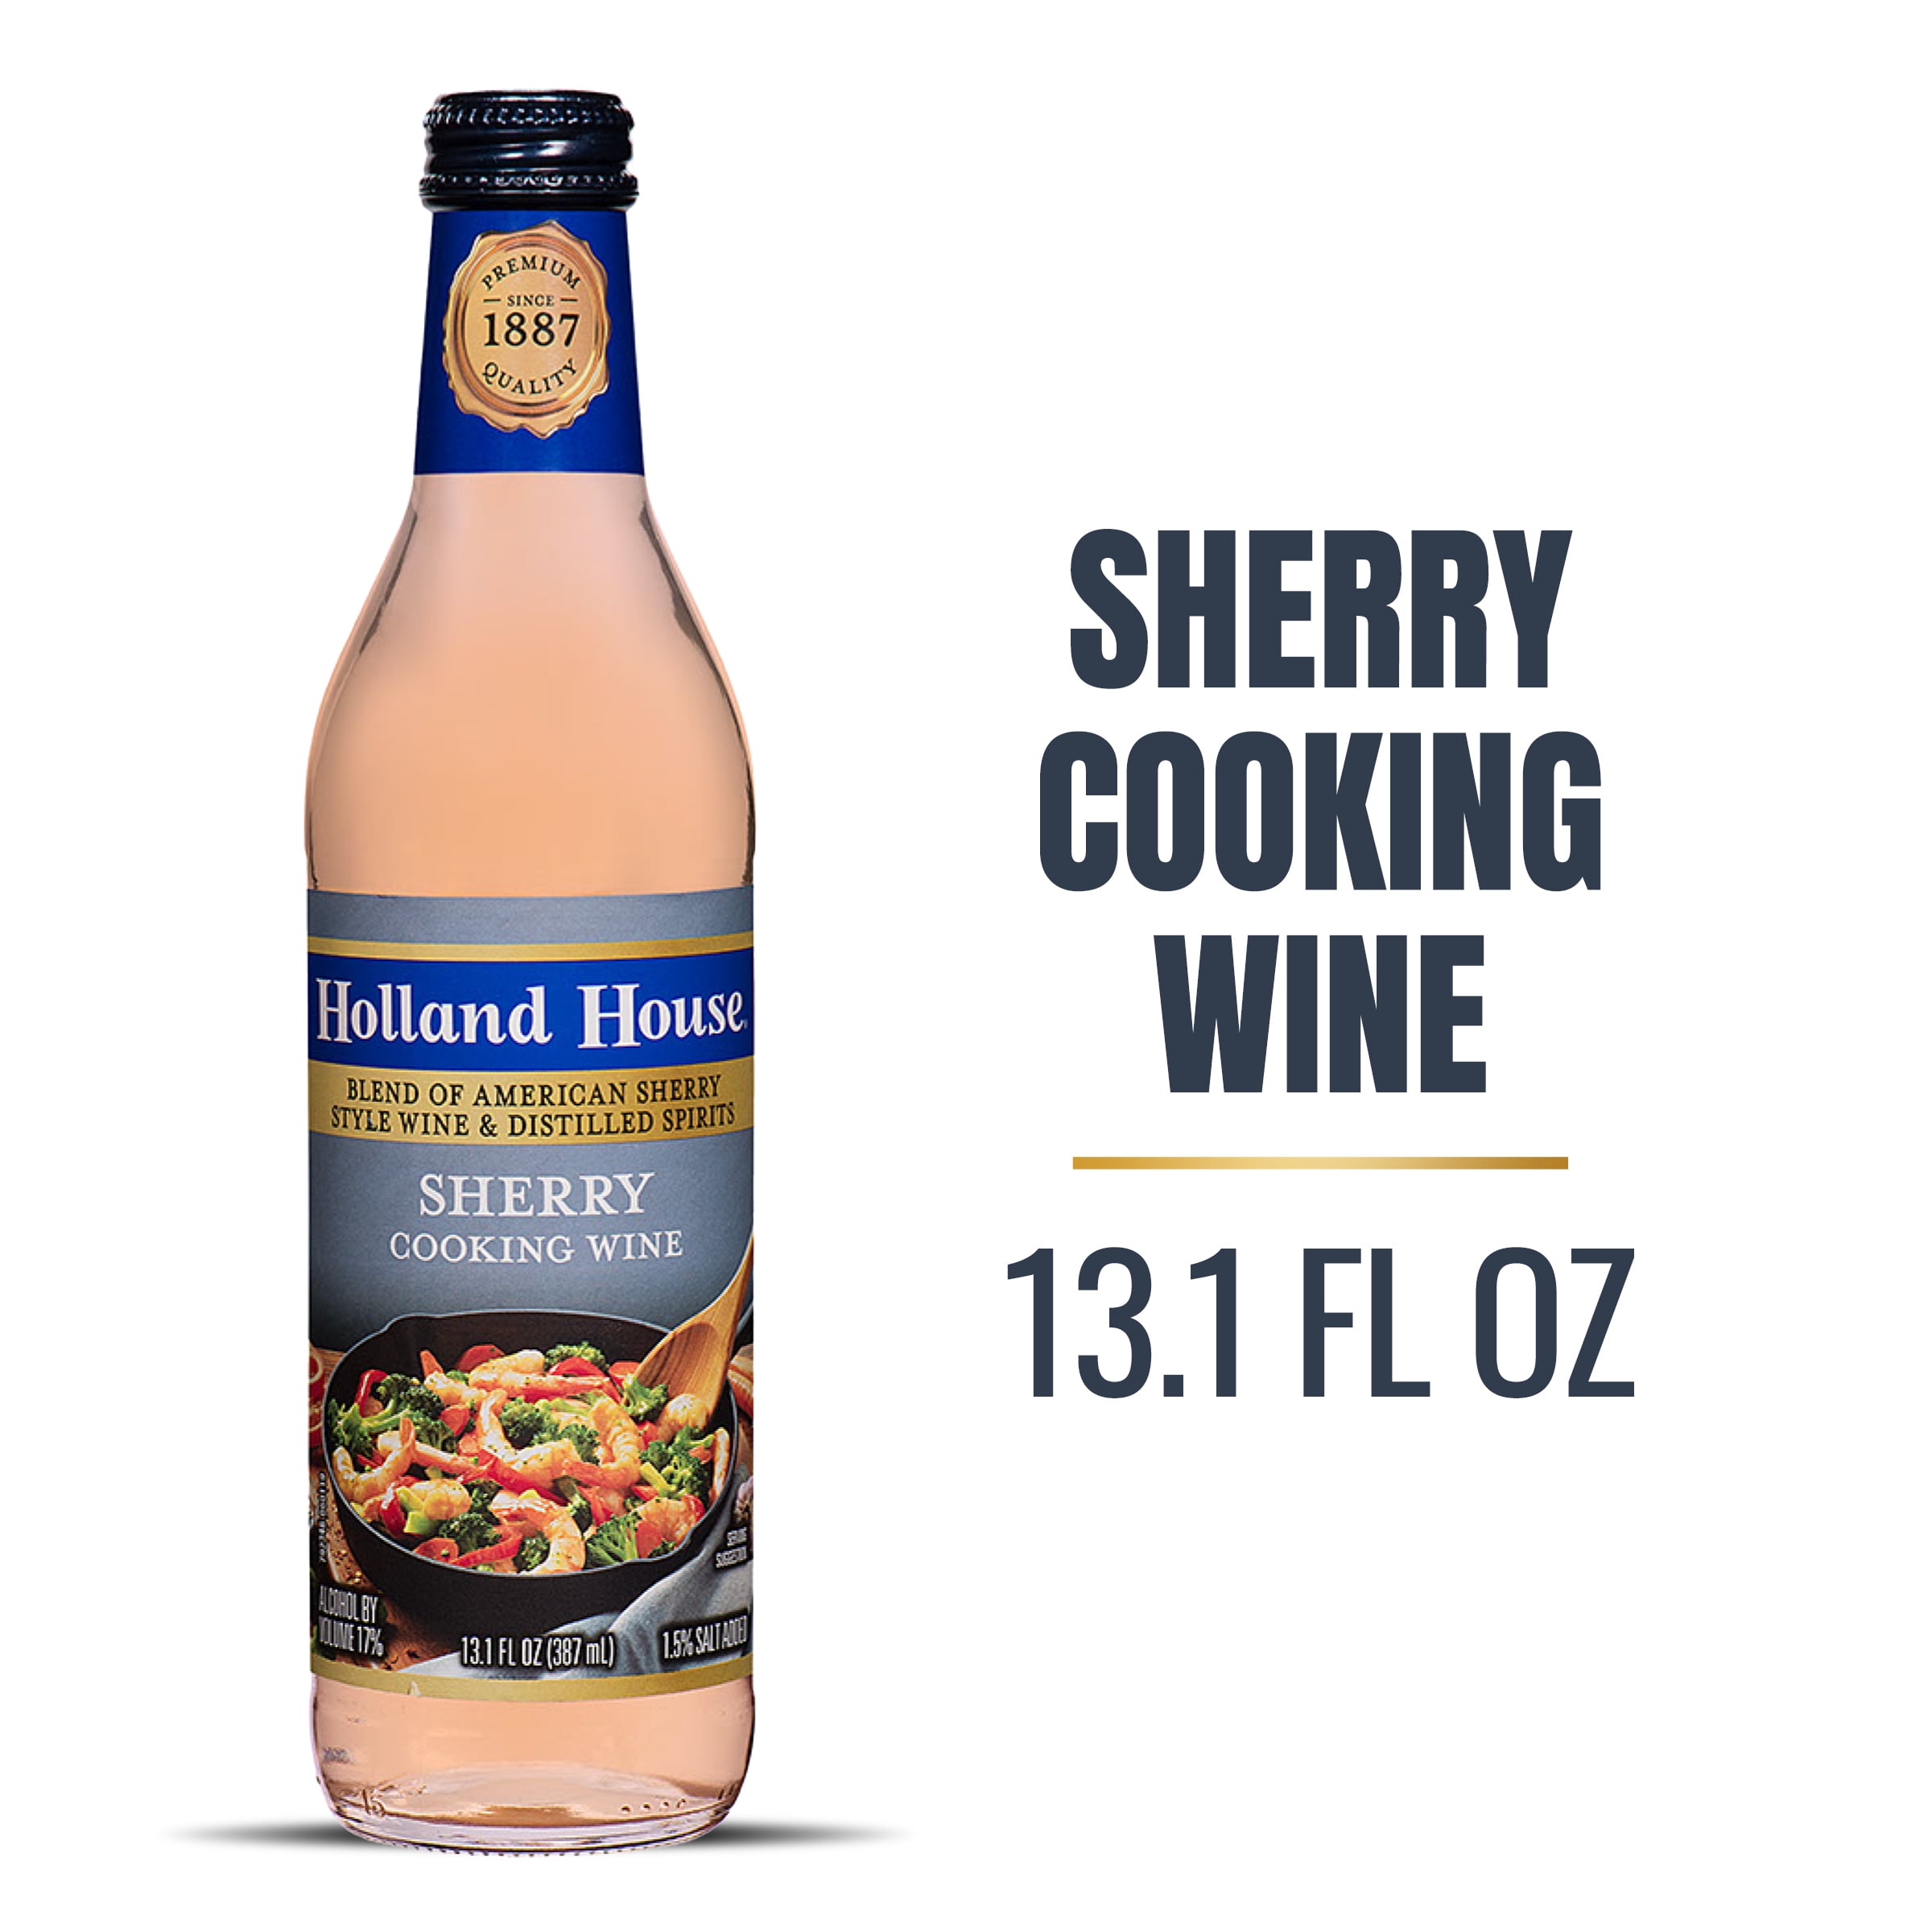 Holland House Sherry Cooking Wine, Ideal for Cooking, Roasting and Marinating, 13 FL OZ